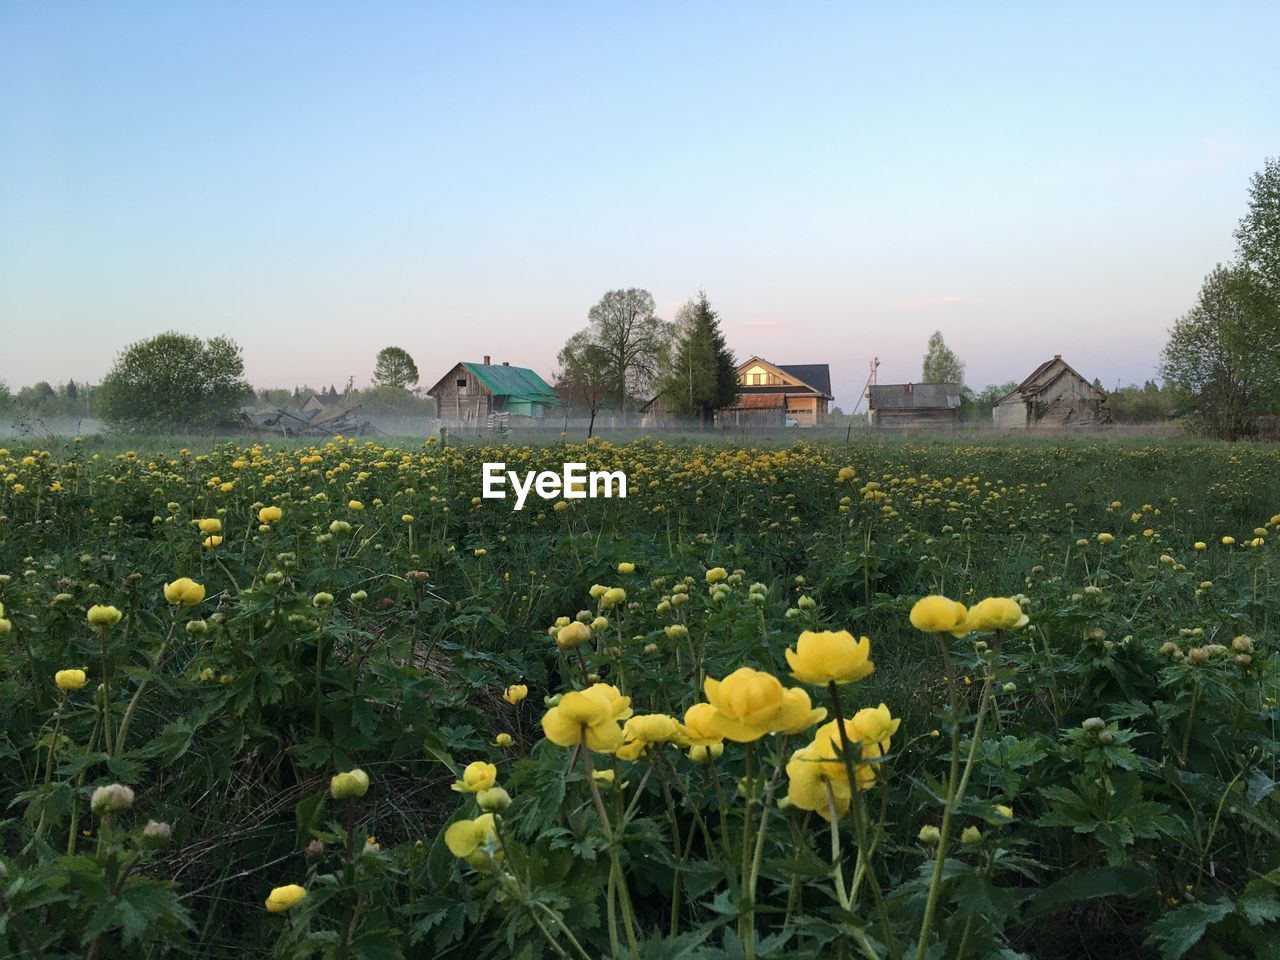 YELLOW FLOWERS GROWING ON FIELD BY BUILDING